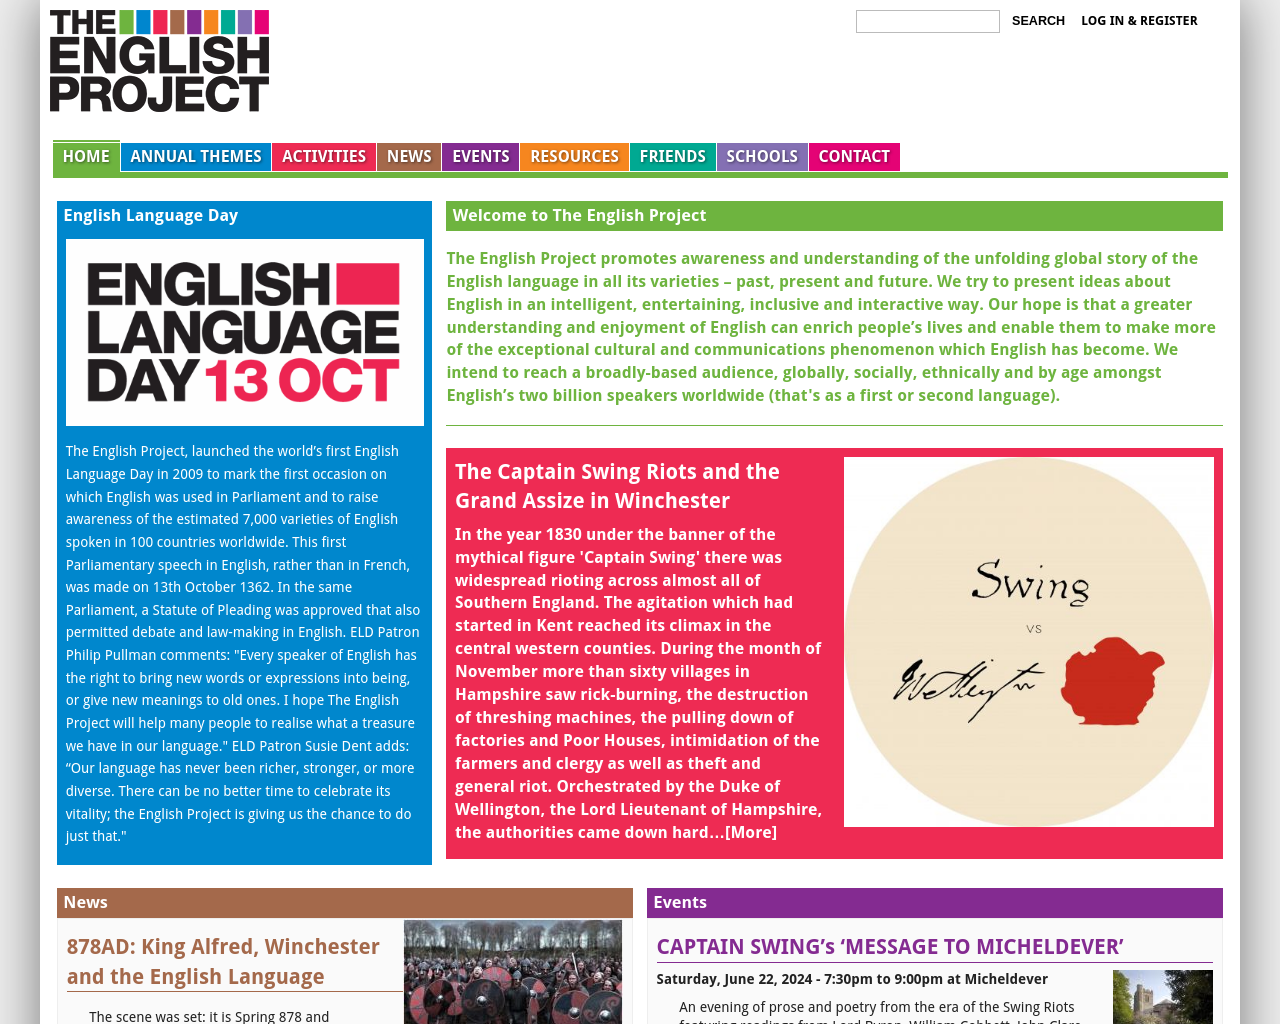 englishproject.org